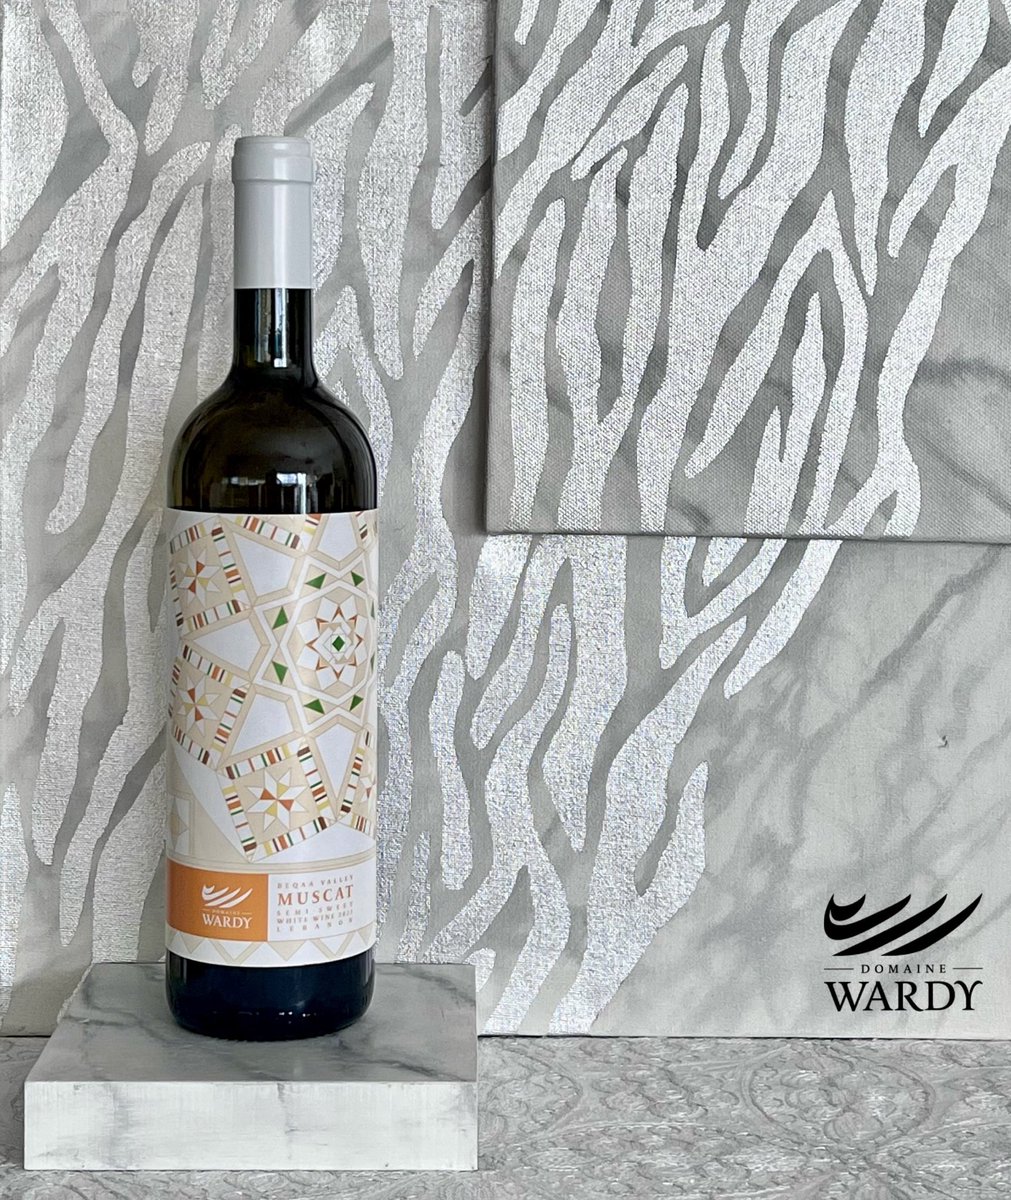 Beqaa Valley Muscat Catavinum World Wine and Spirits Competition, Spain: Gold Medal . #domainewardy #wine #whitewine #muscat #semisweet #semisweetwine #mediumsweet #vegan #awardwinning #sustainable #lebanesewine #winesoflebanon #lebanesewineries #lebanon #familybusiness